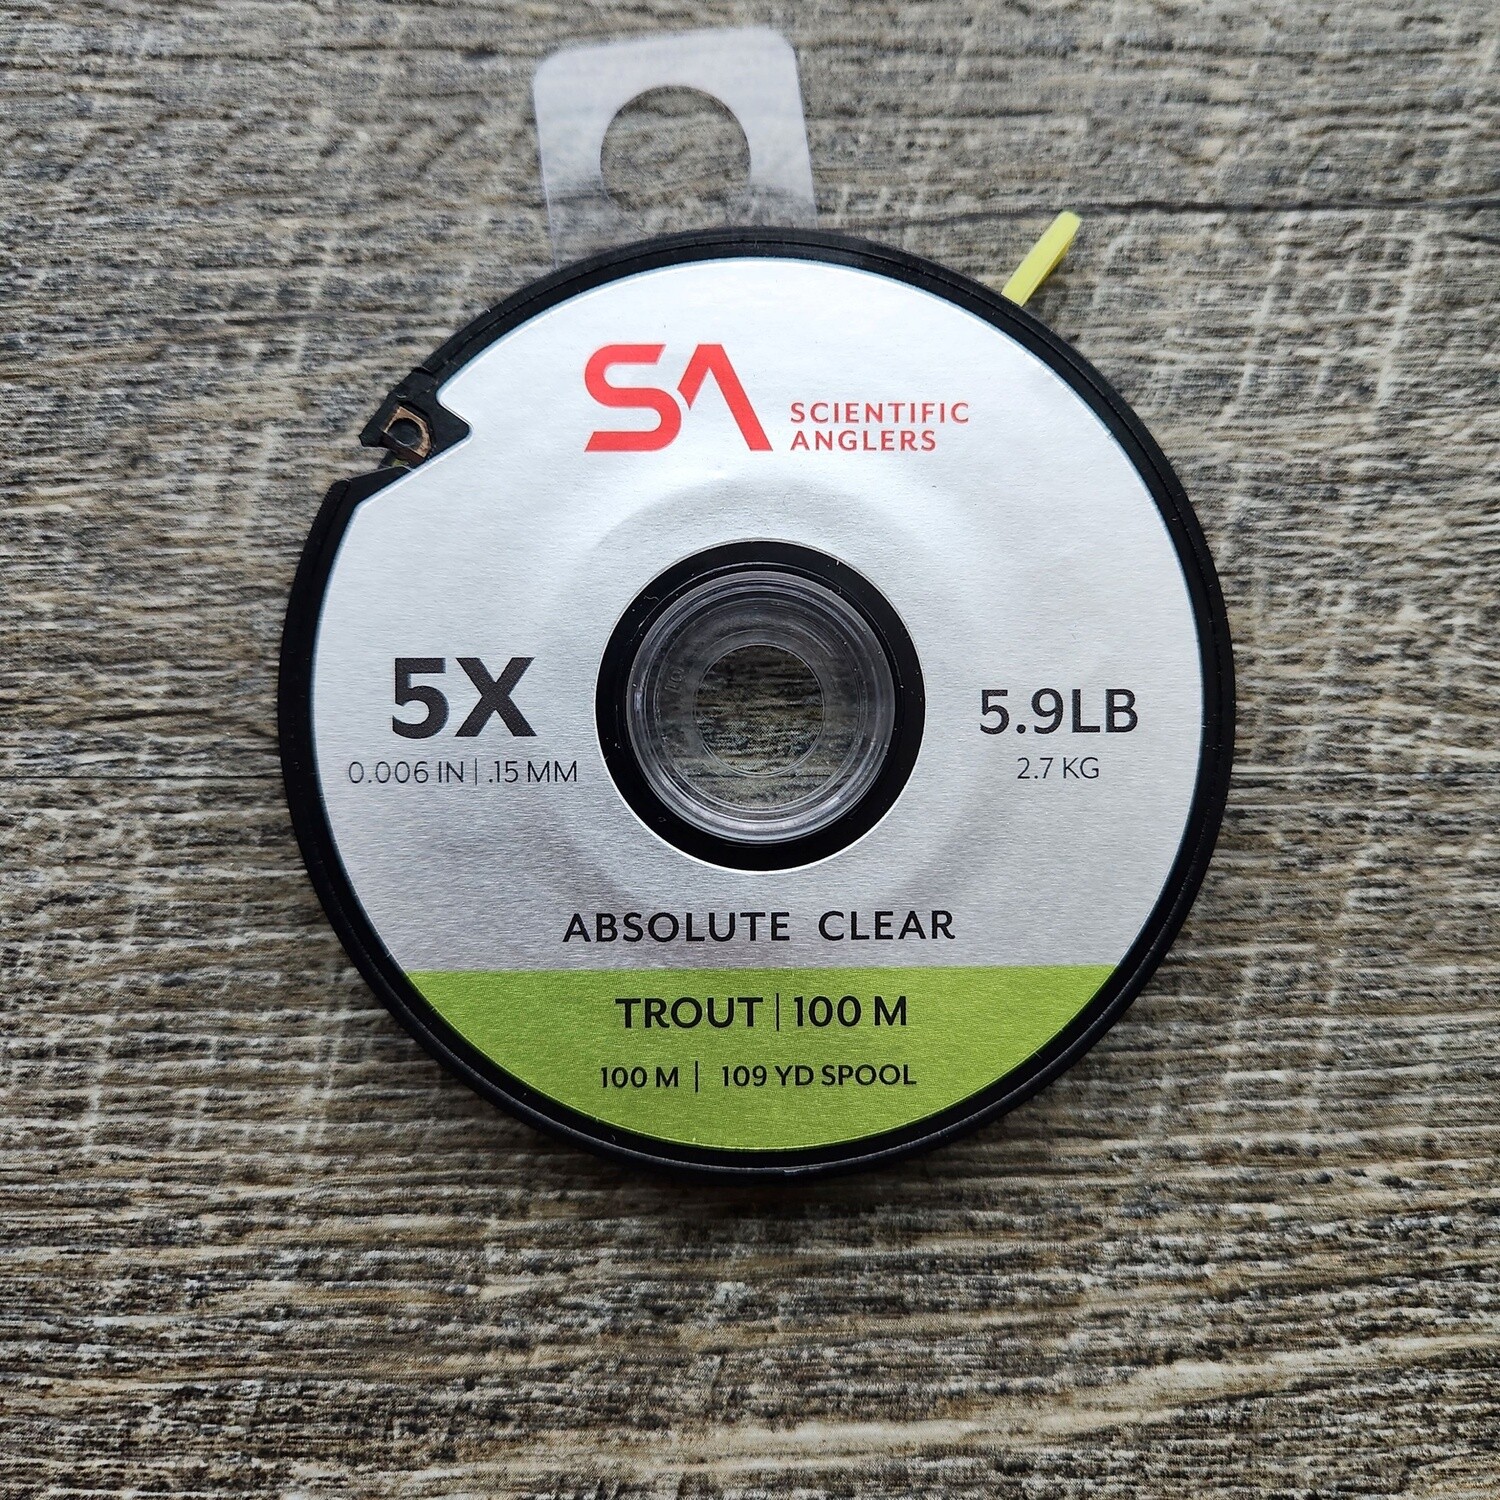 SA ABSOLUTE CLEAR TROUT TIPPET 5X 100 METERS